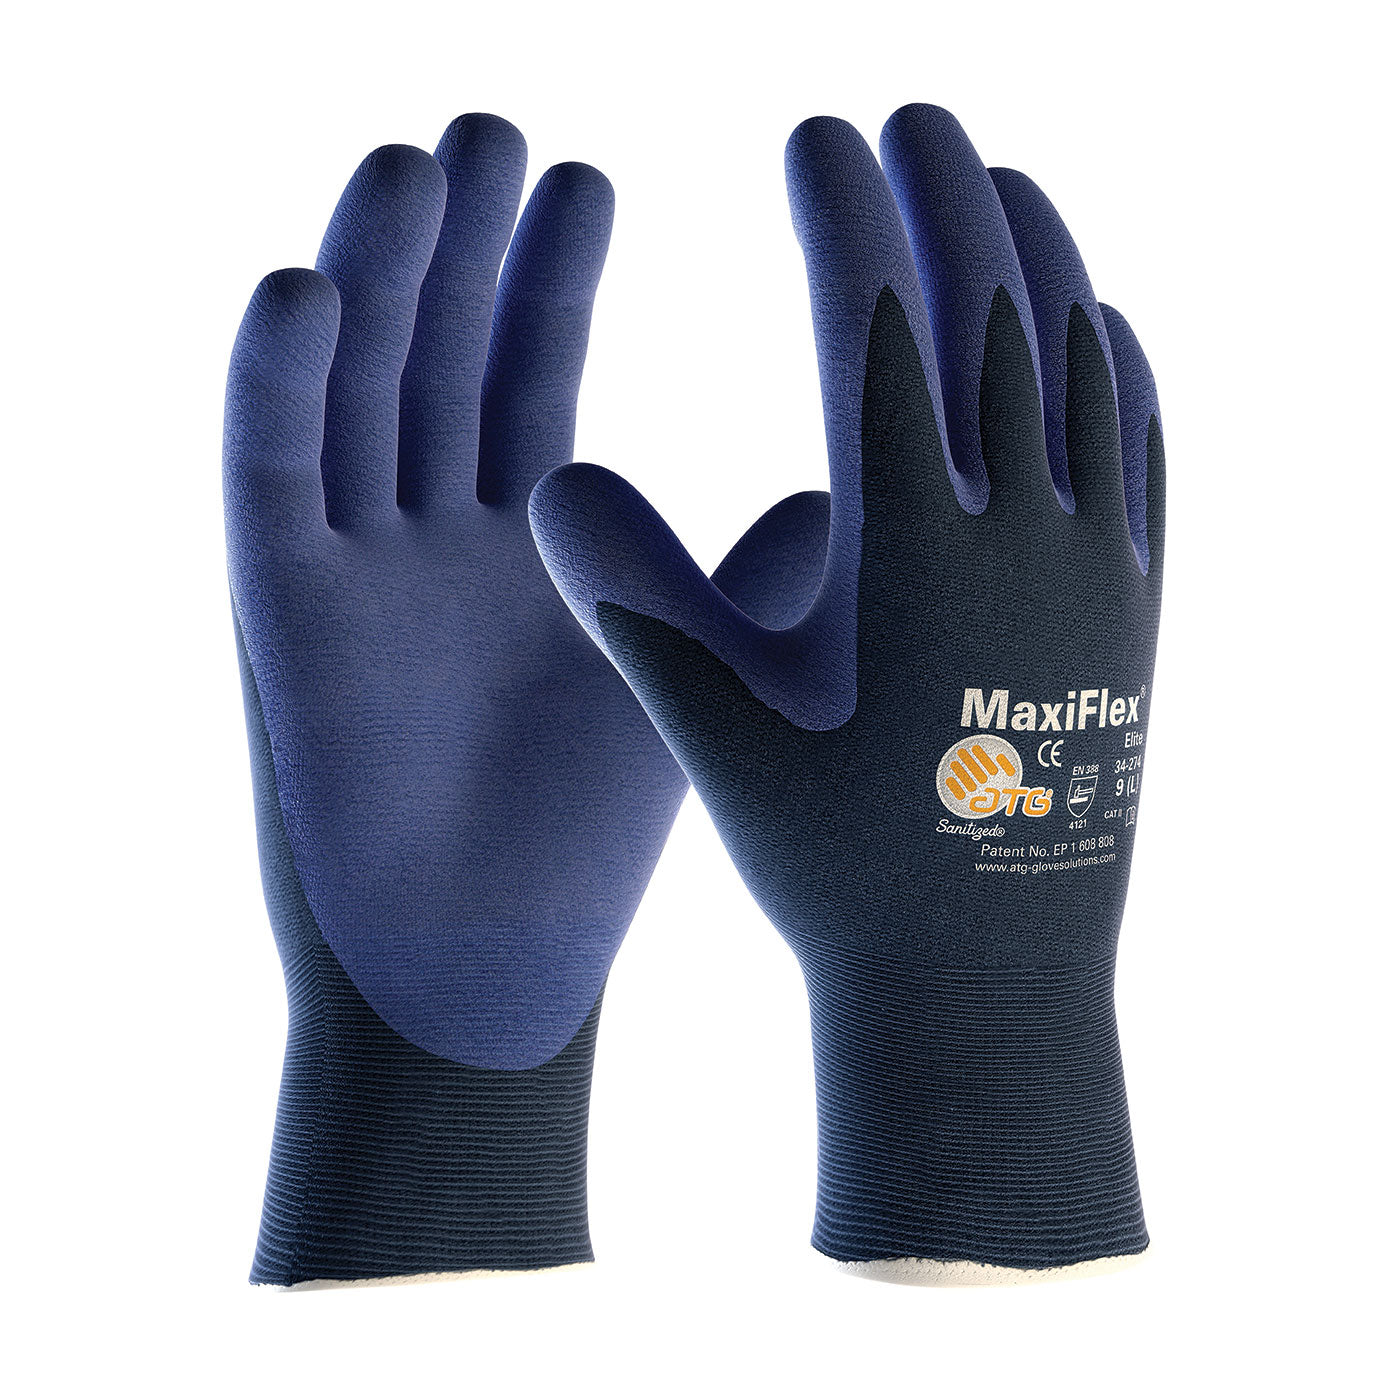 Maxiflex Elite Seamless Knit Gloves By Atg, Sold By Pair-GP34274XS